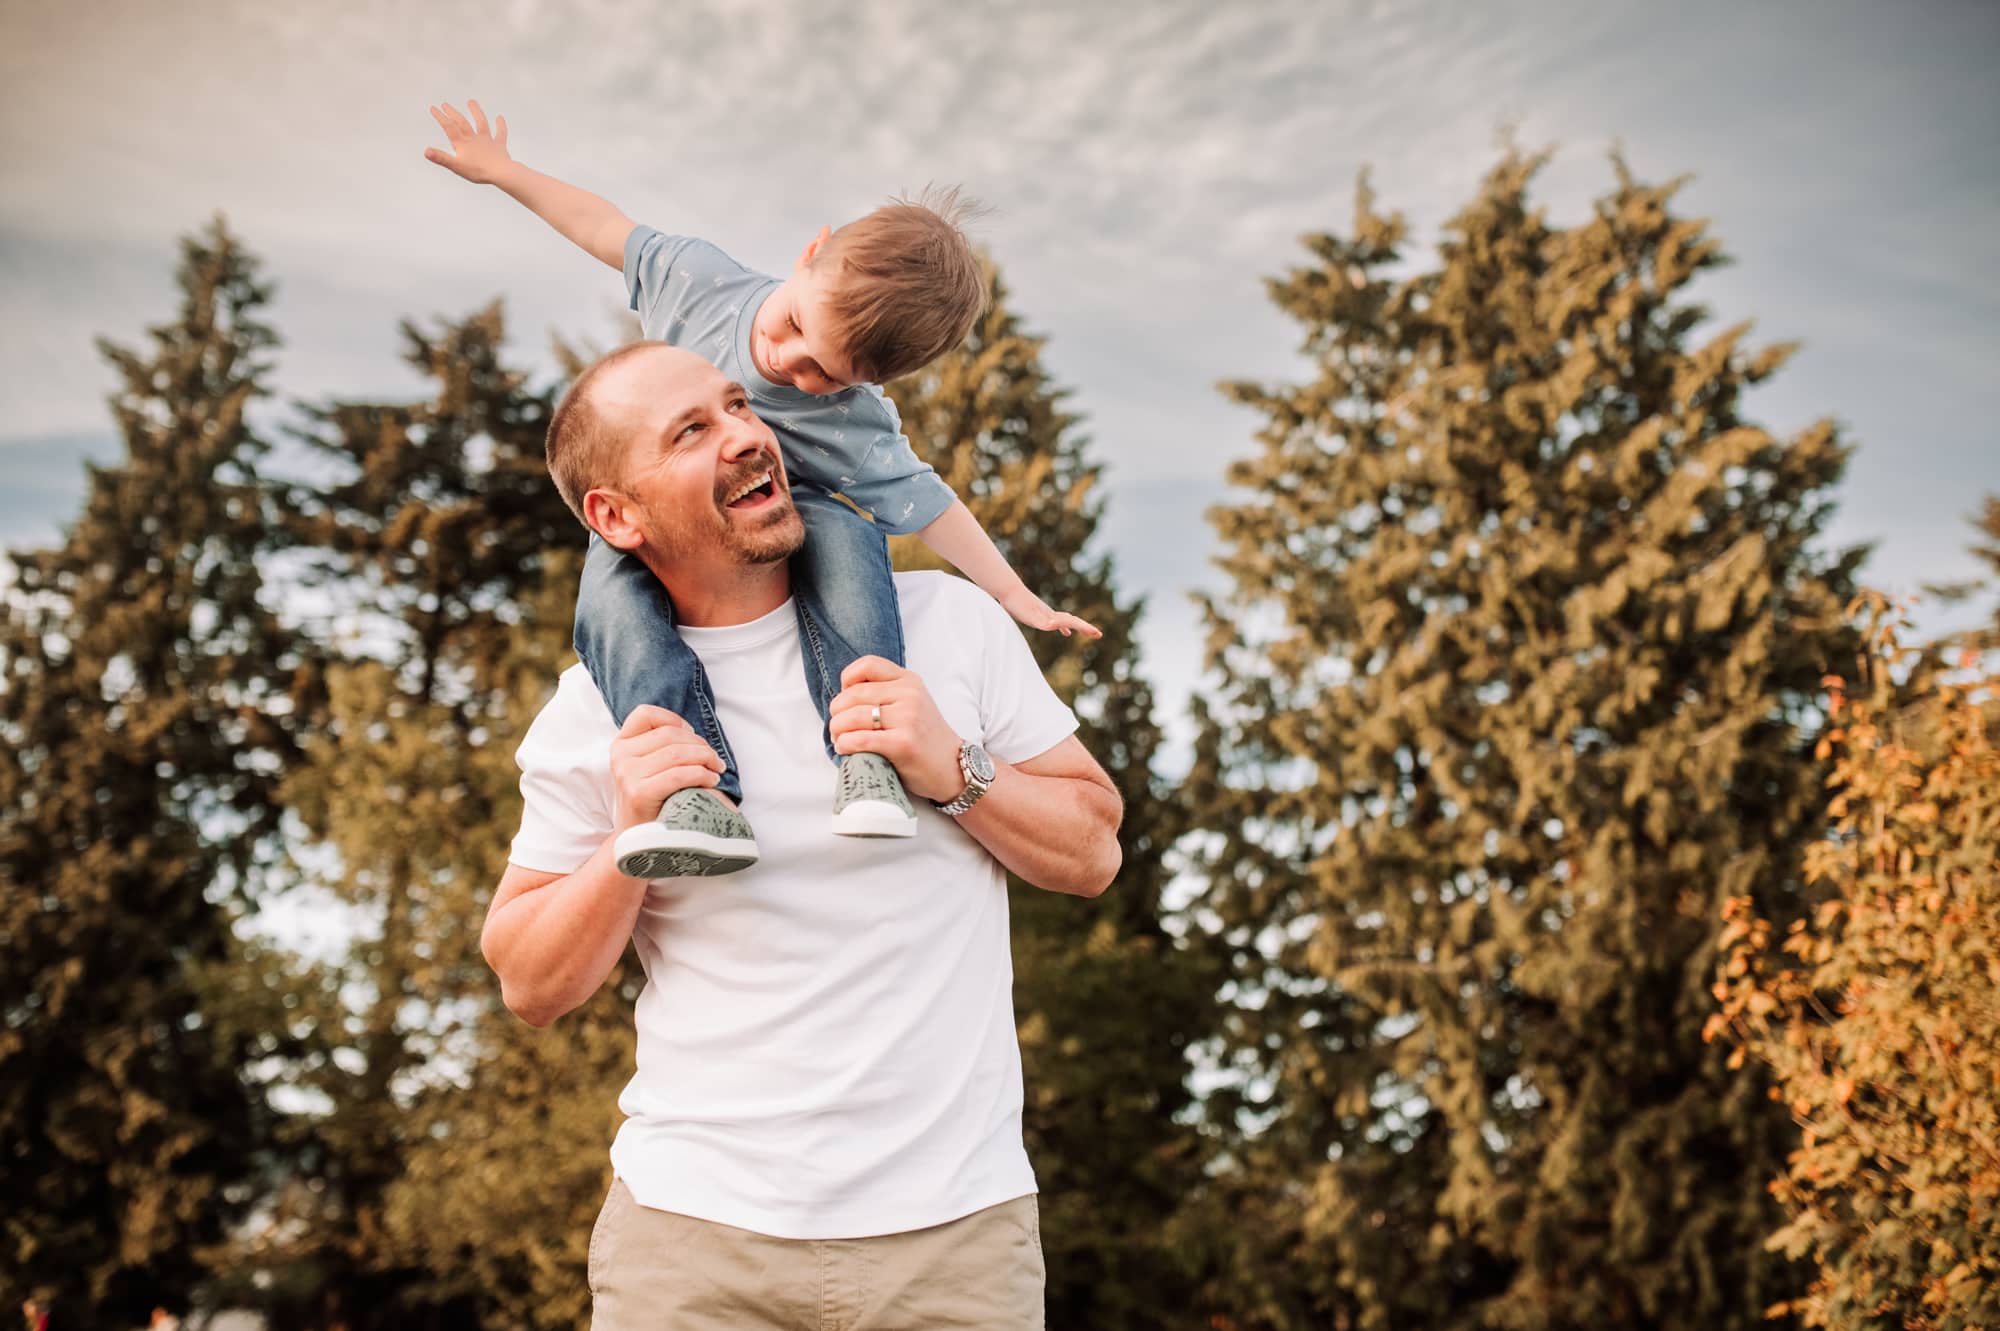 West Vancouver photographer captures cute moment of boy playing airplane on his dad's shoulders.